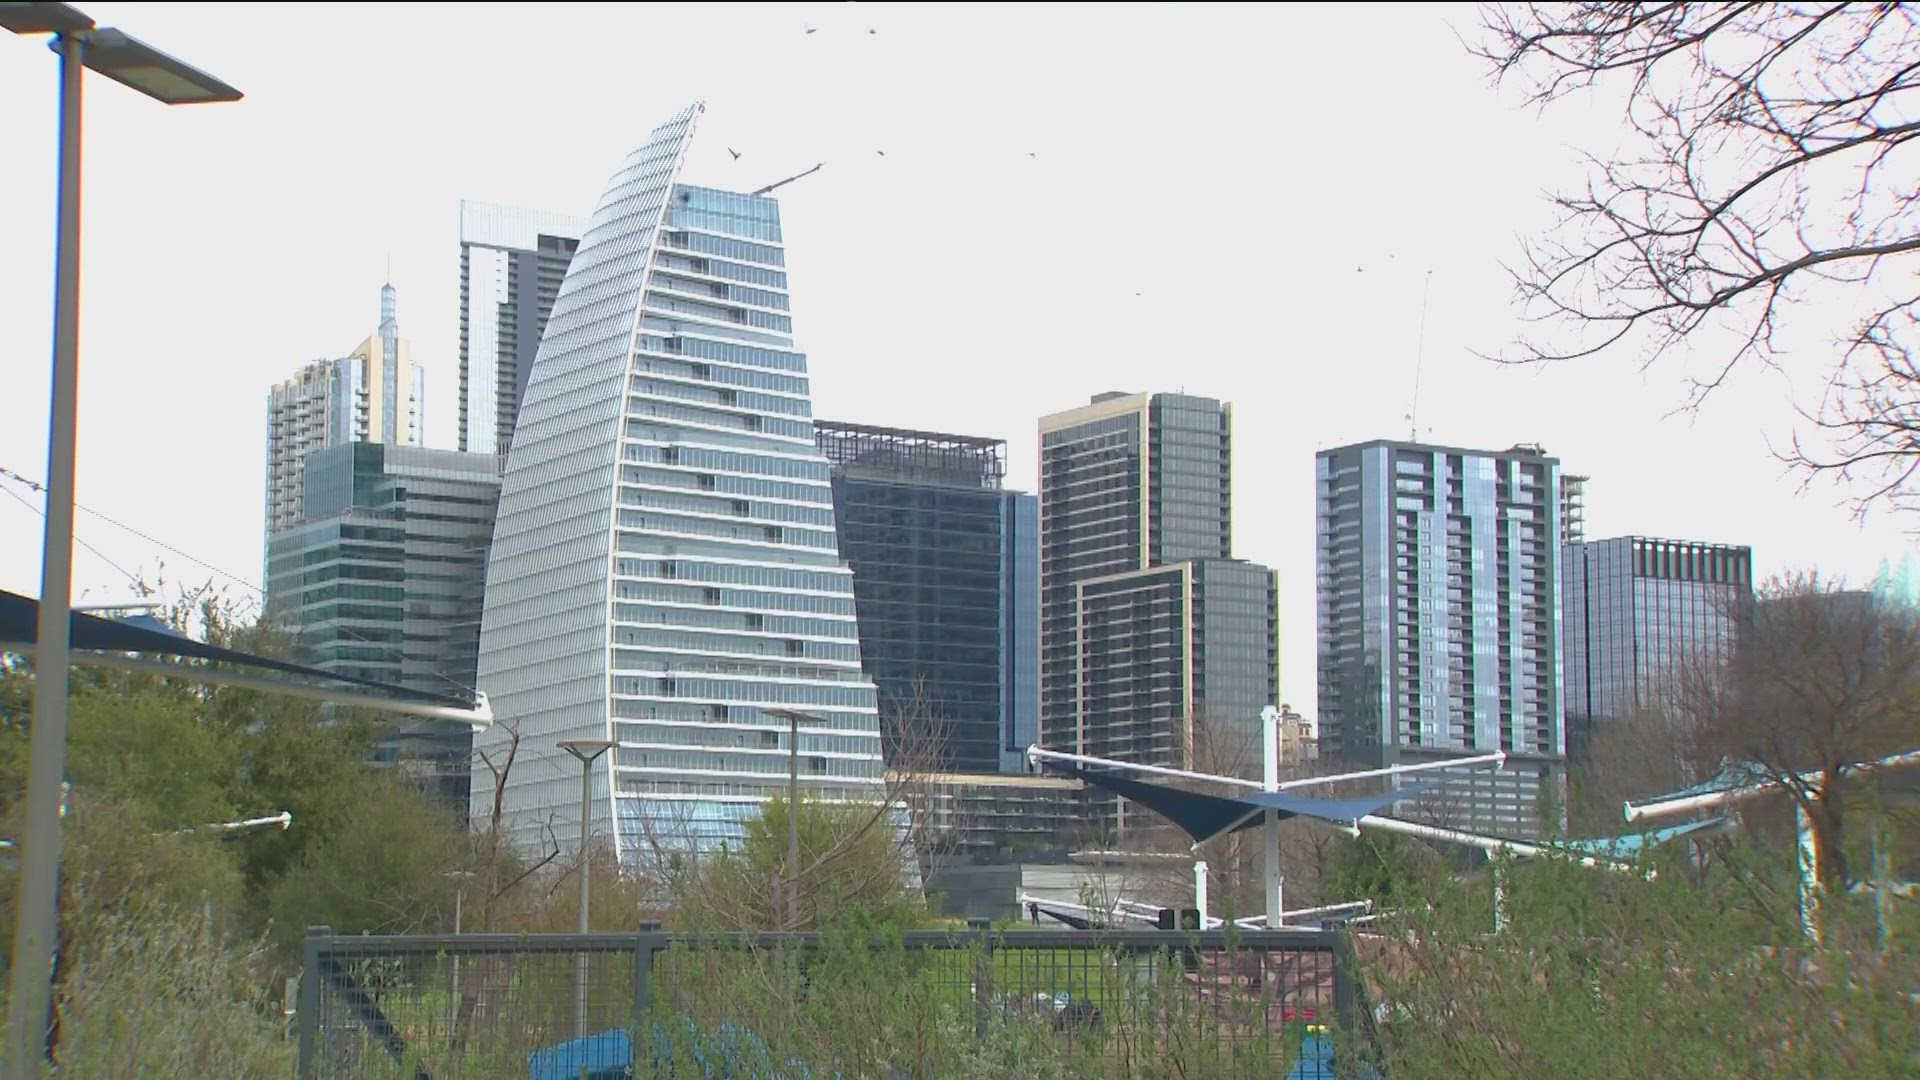 The Austin City Council is expected to vote on the initiative at their March 7 meeting.